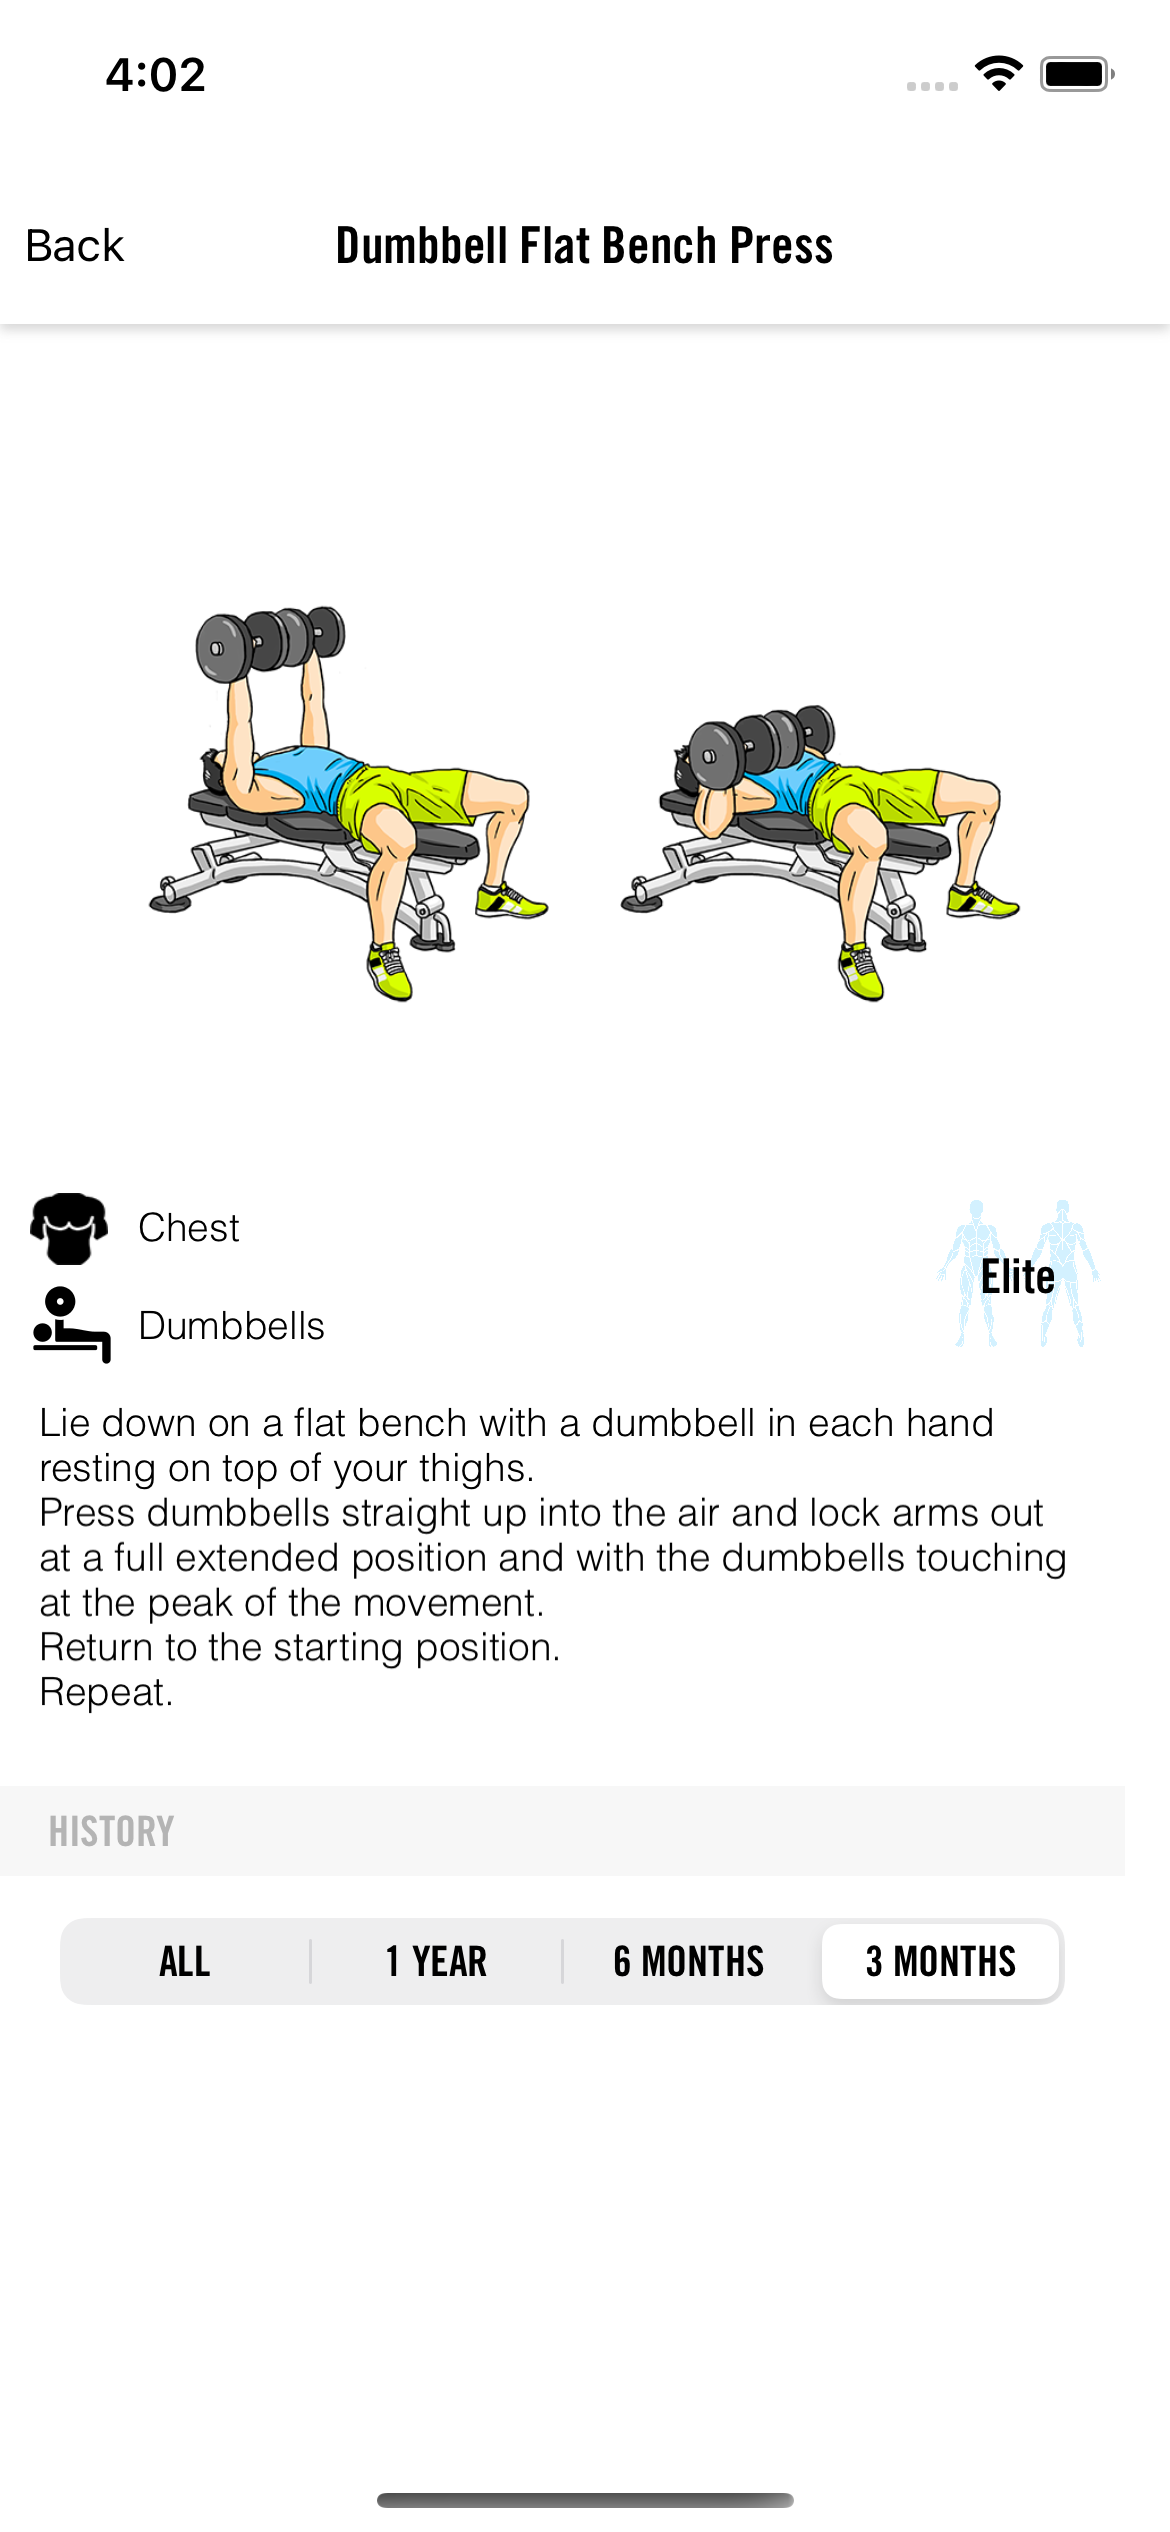 GET DETAILED INFO ABOUT EXERCISES!